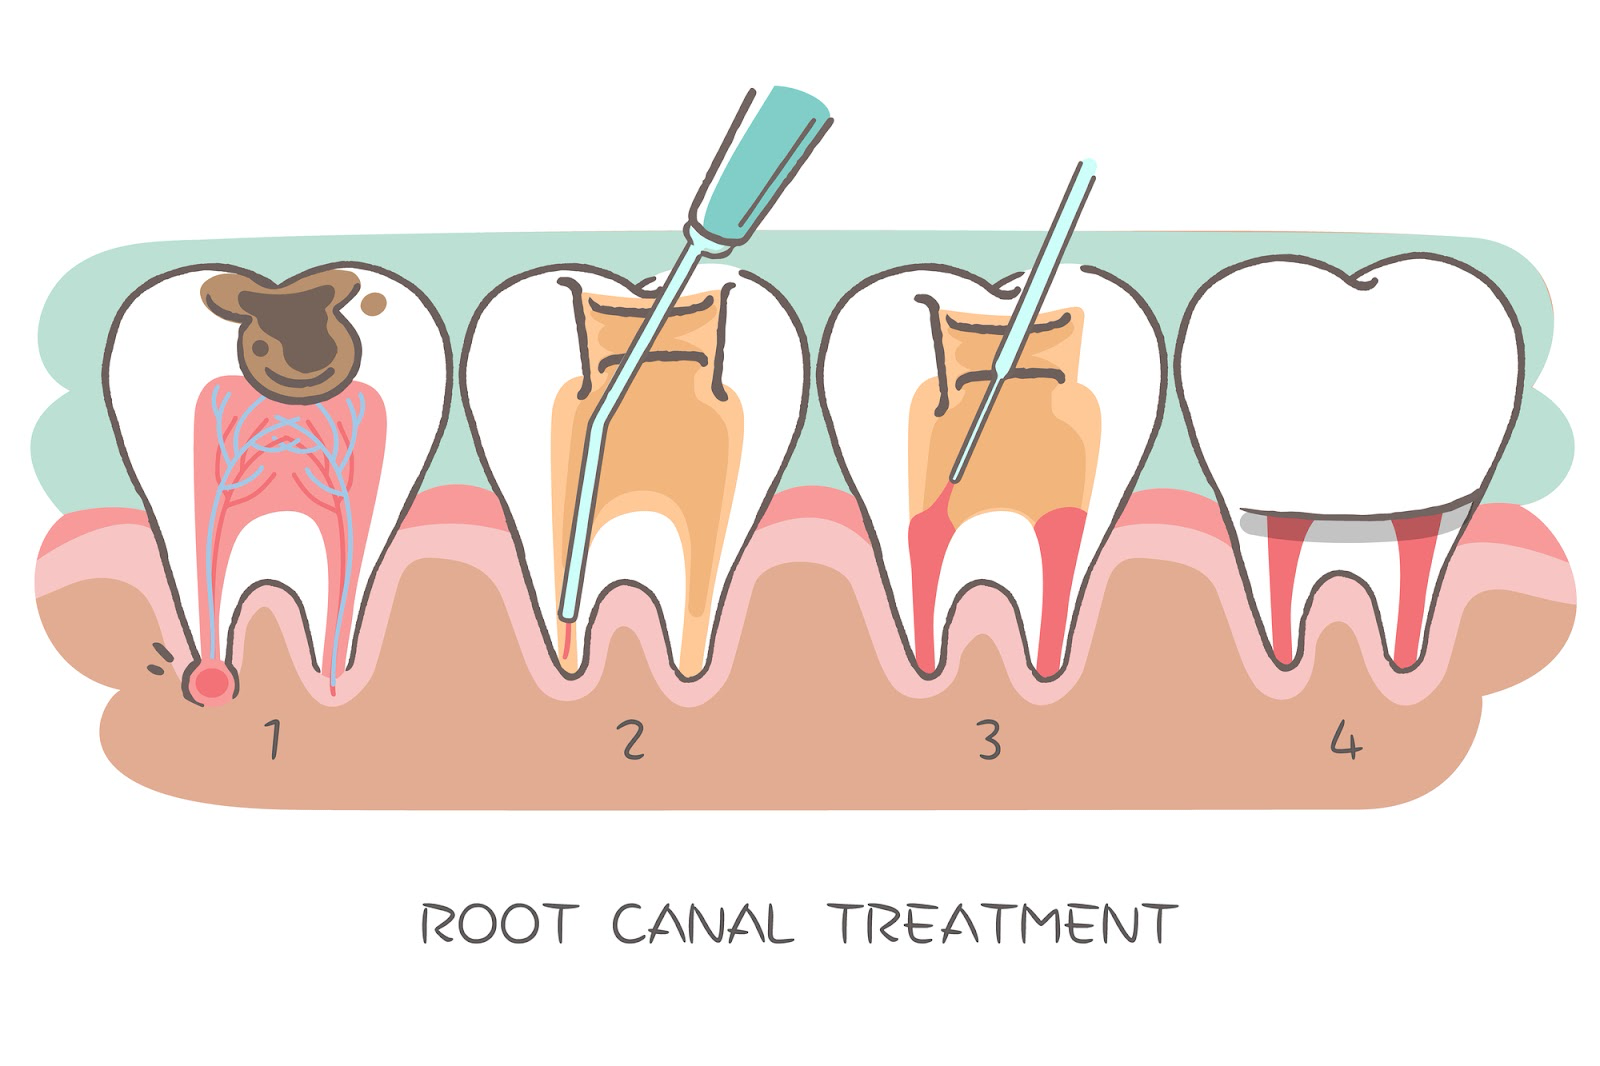 Have questions about root canal treatment? We have answers!